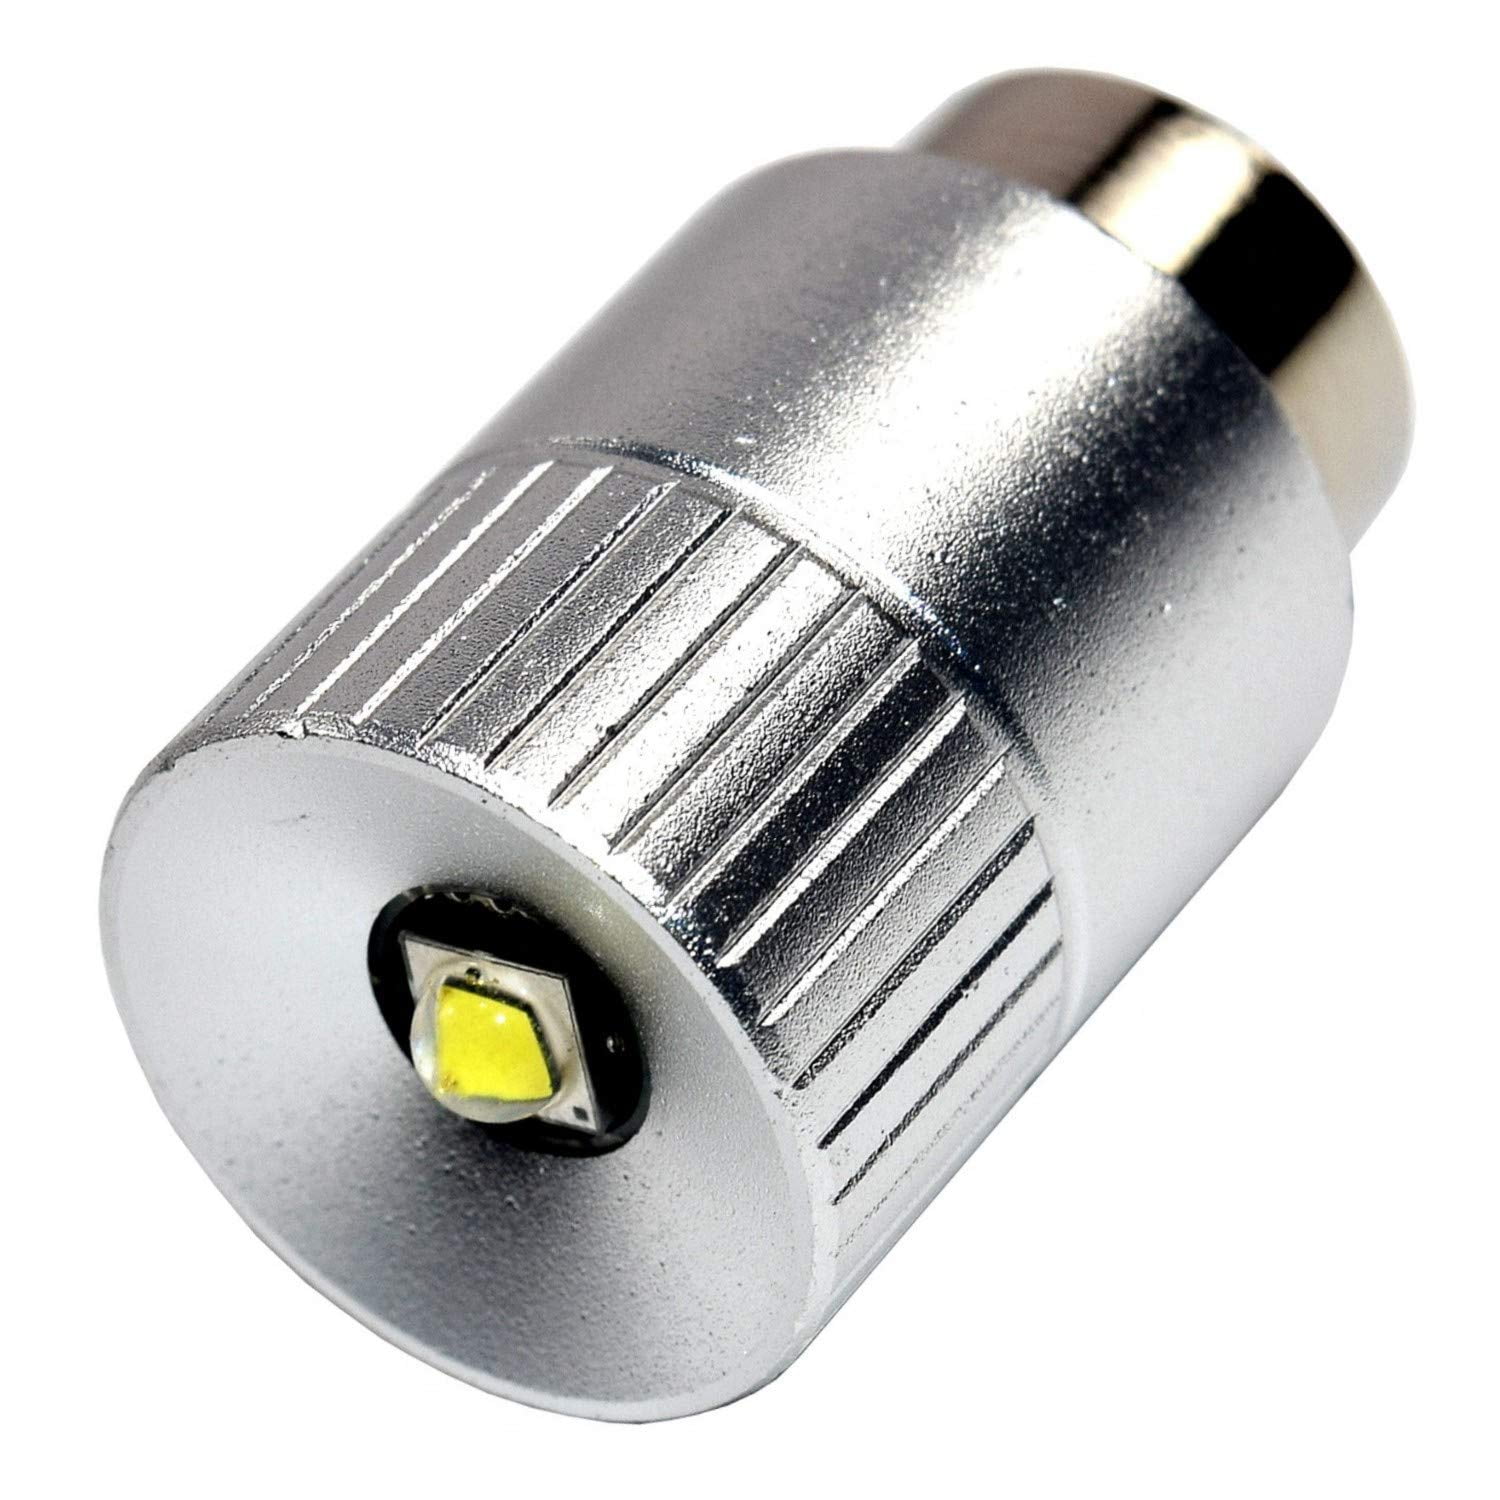 HQRP Upgrade LED 3W Bulb for Maglite 3 4 5 6 D/C 3D 4D 5D 6D Small Base 